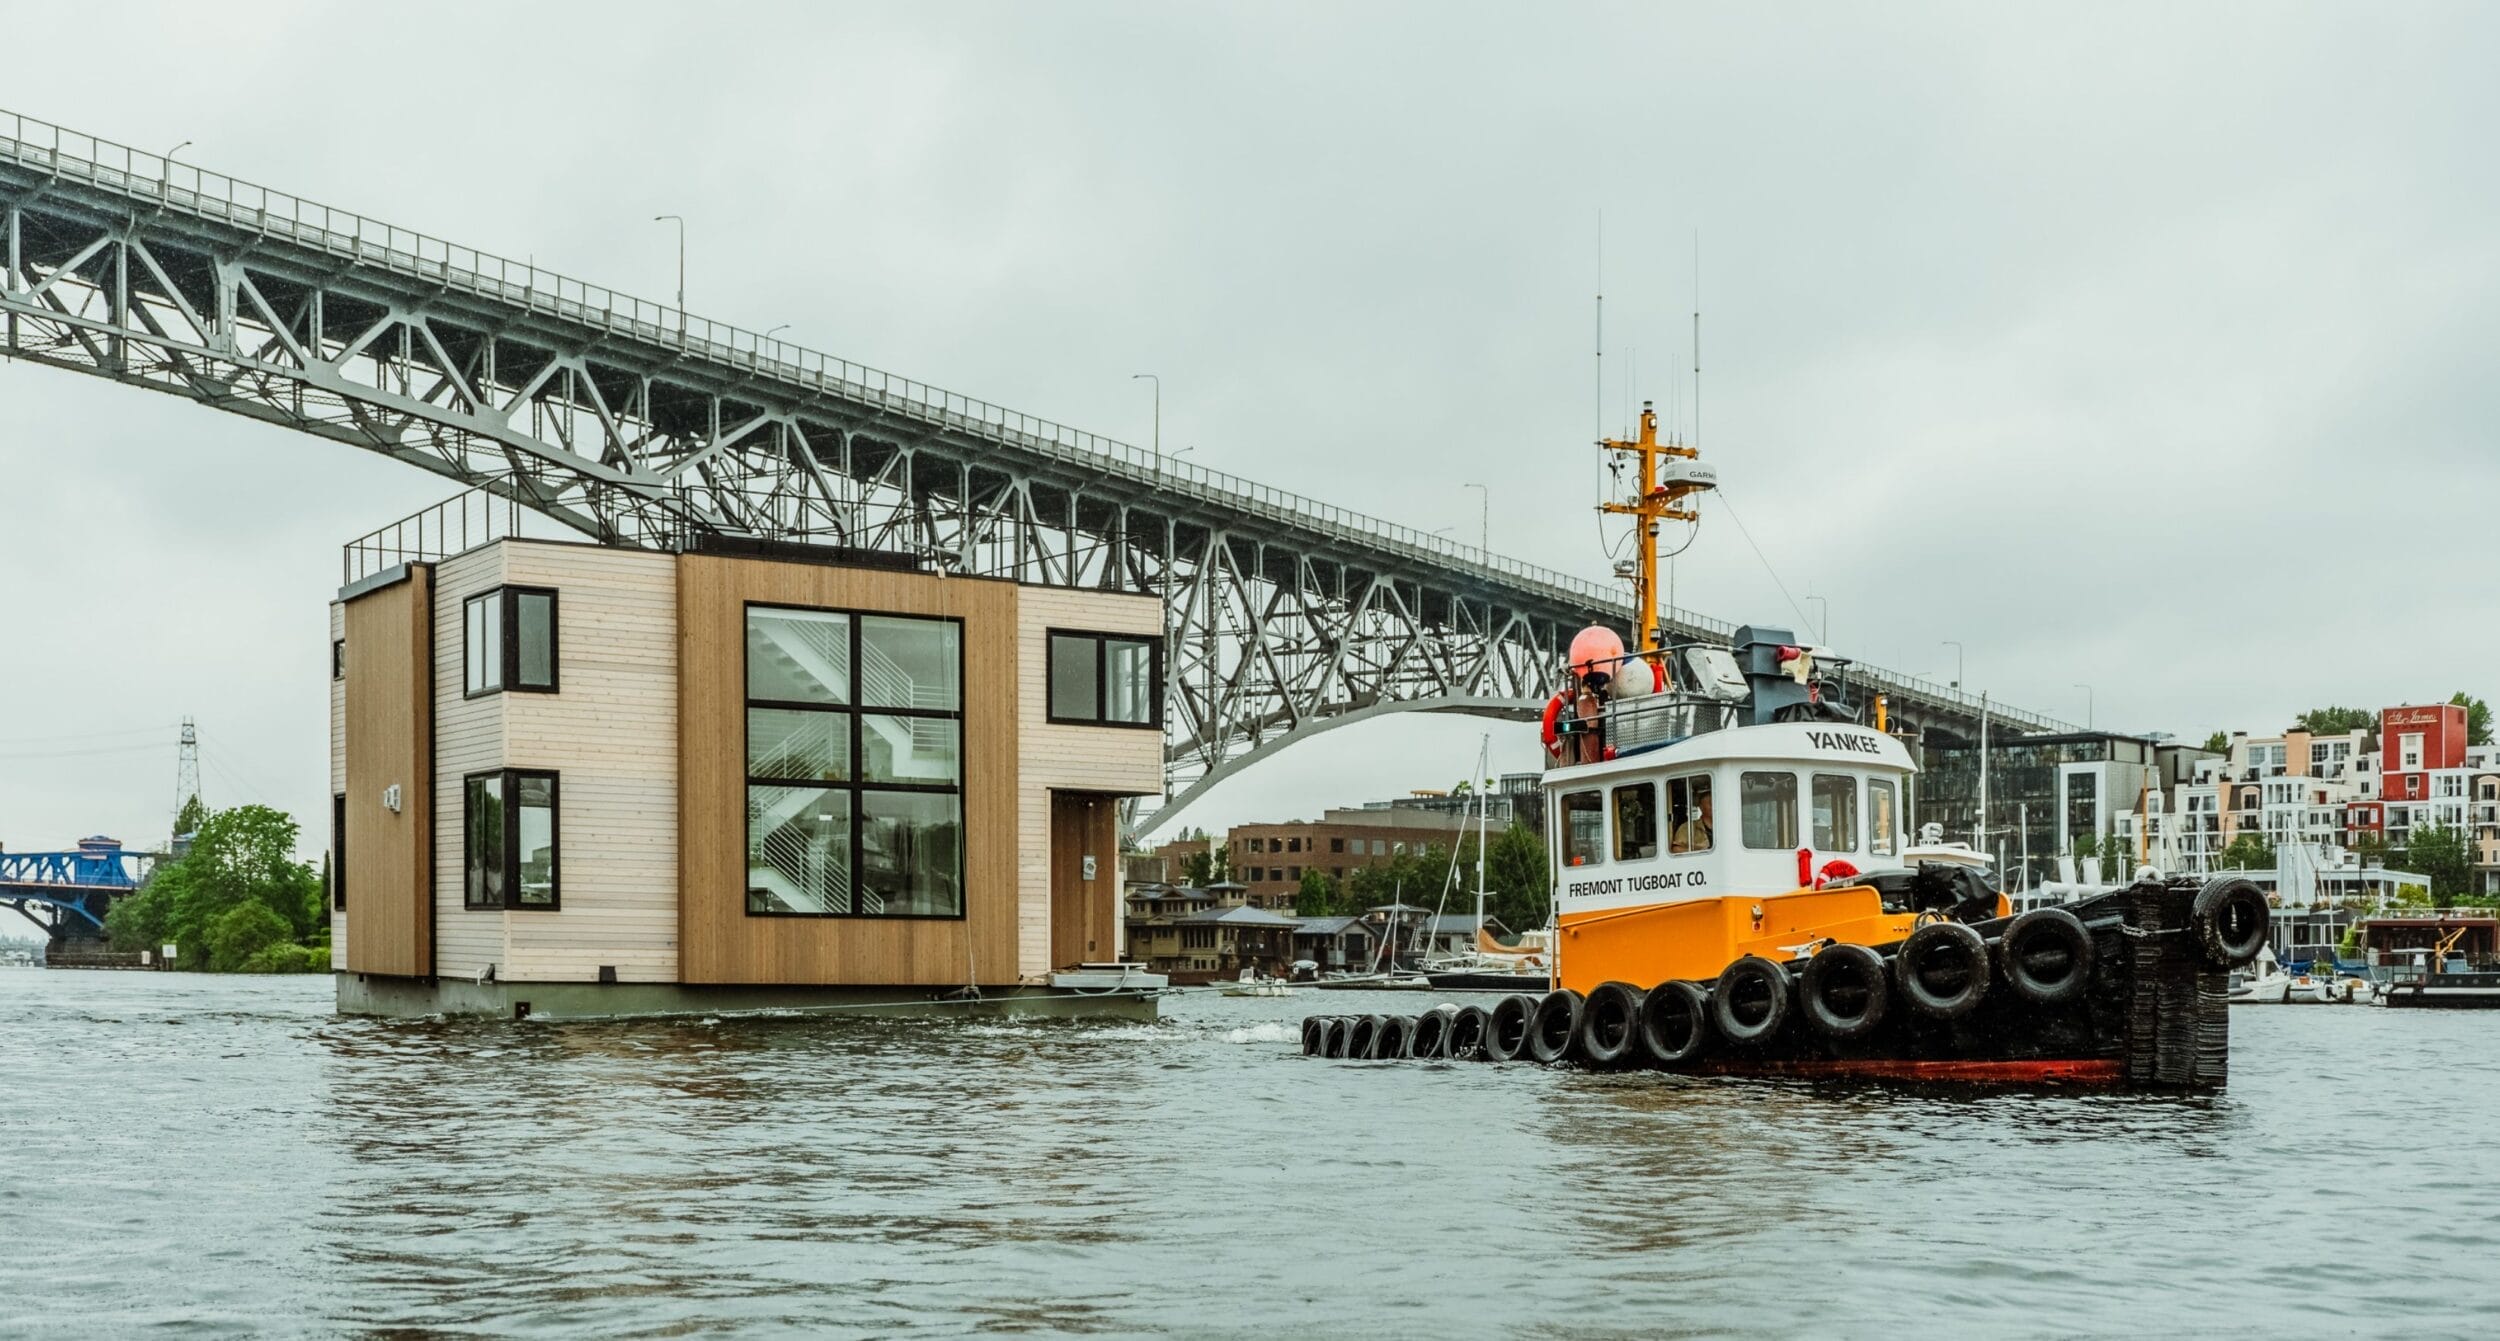 A Dyna floating home, built by Dyna Builders, peacefully floats in the water under a bridge.